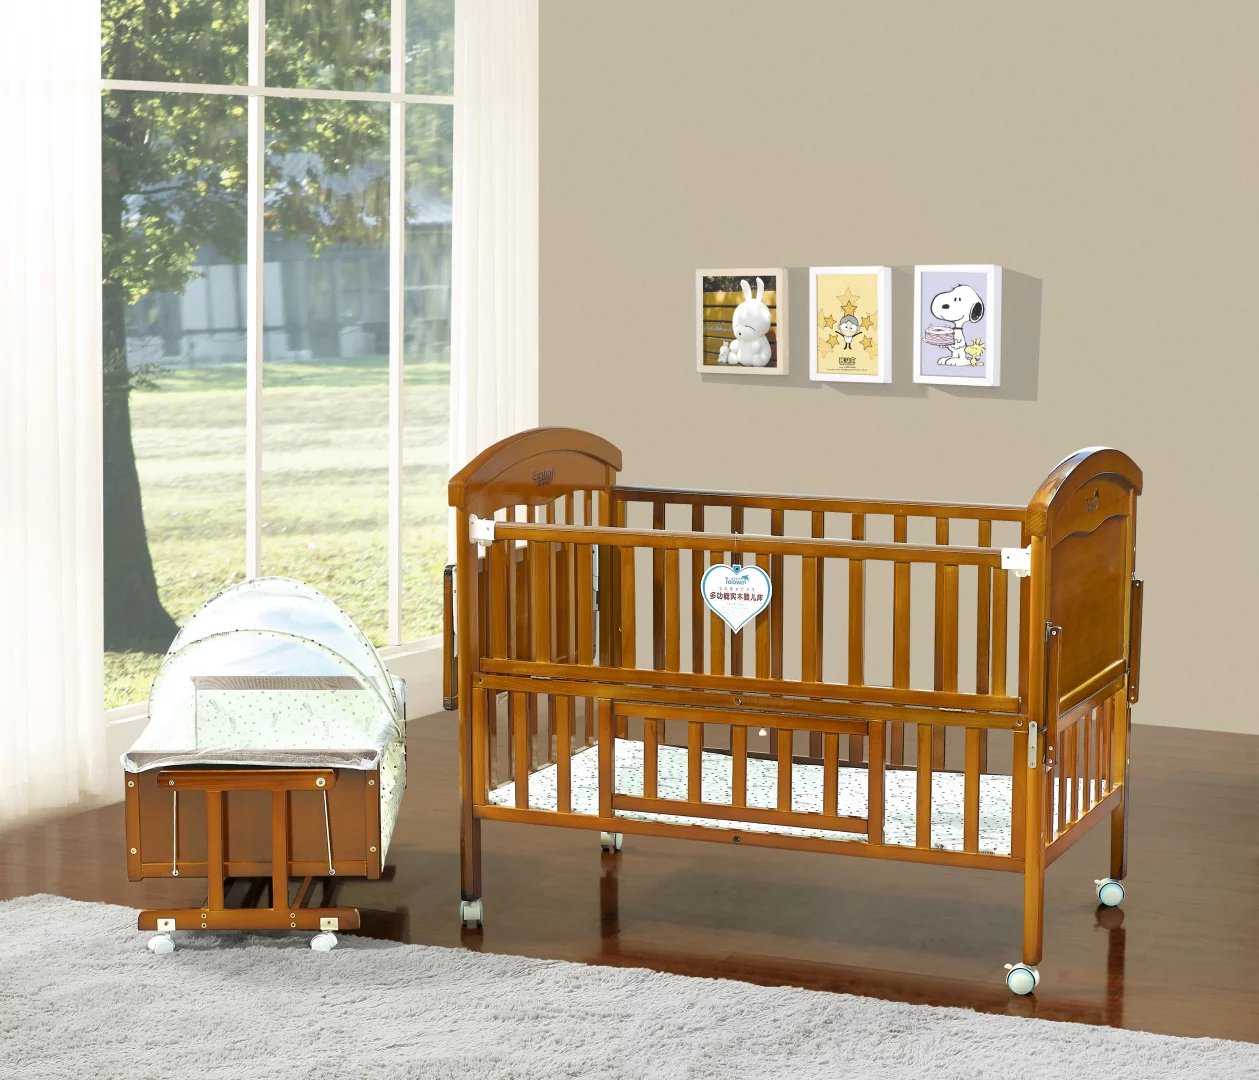 3 in 1 baby cot